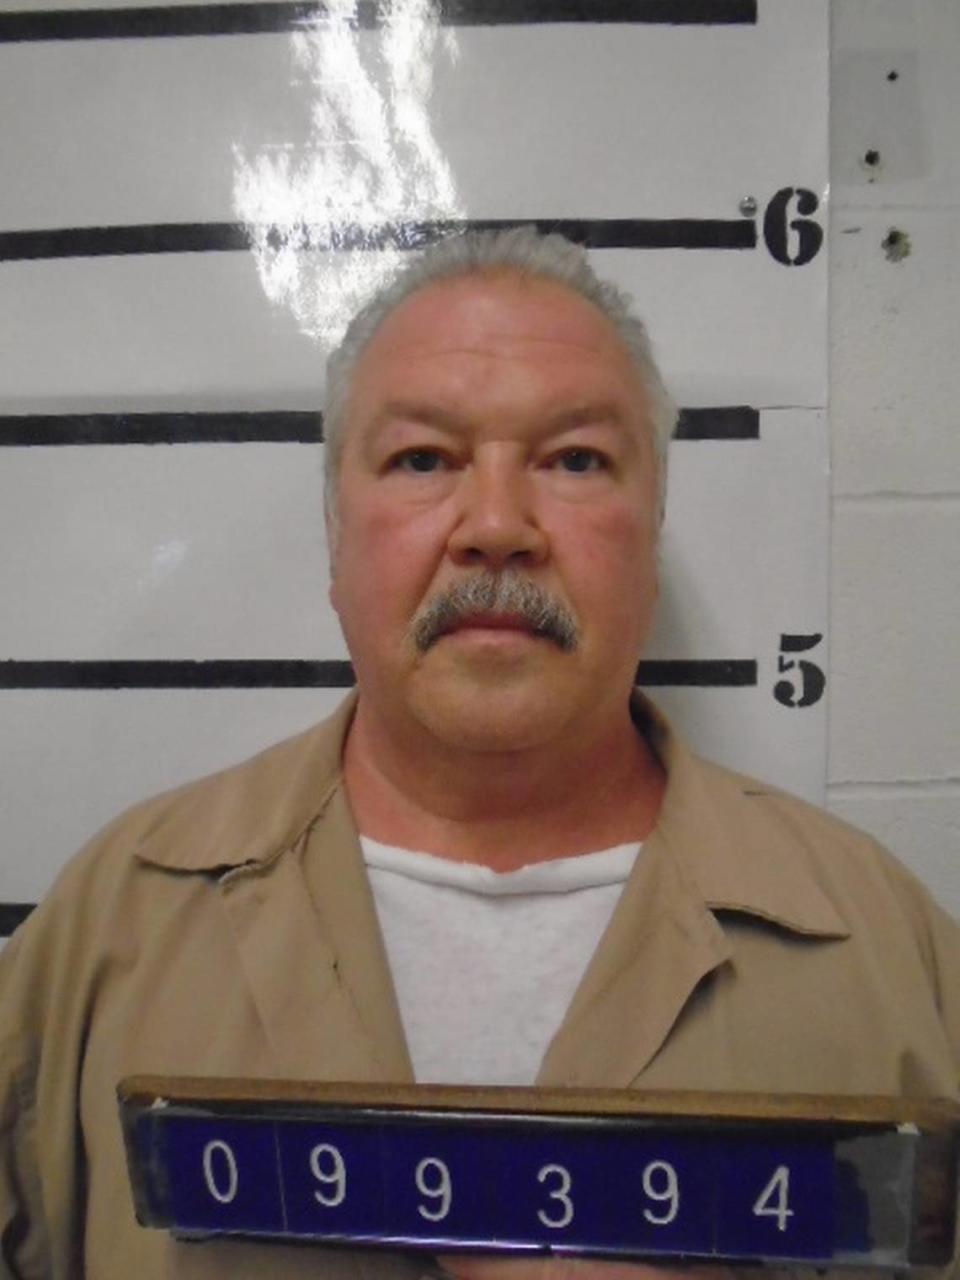 Donald Bartley was convicted of taking part in the 1985 murder of a University of Kentucky student in Letcher County.